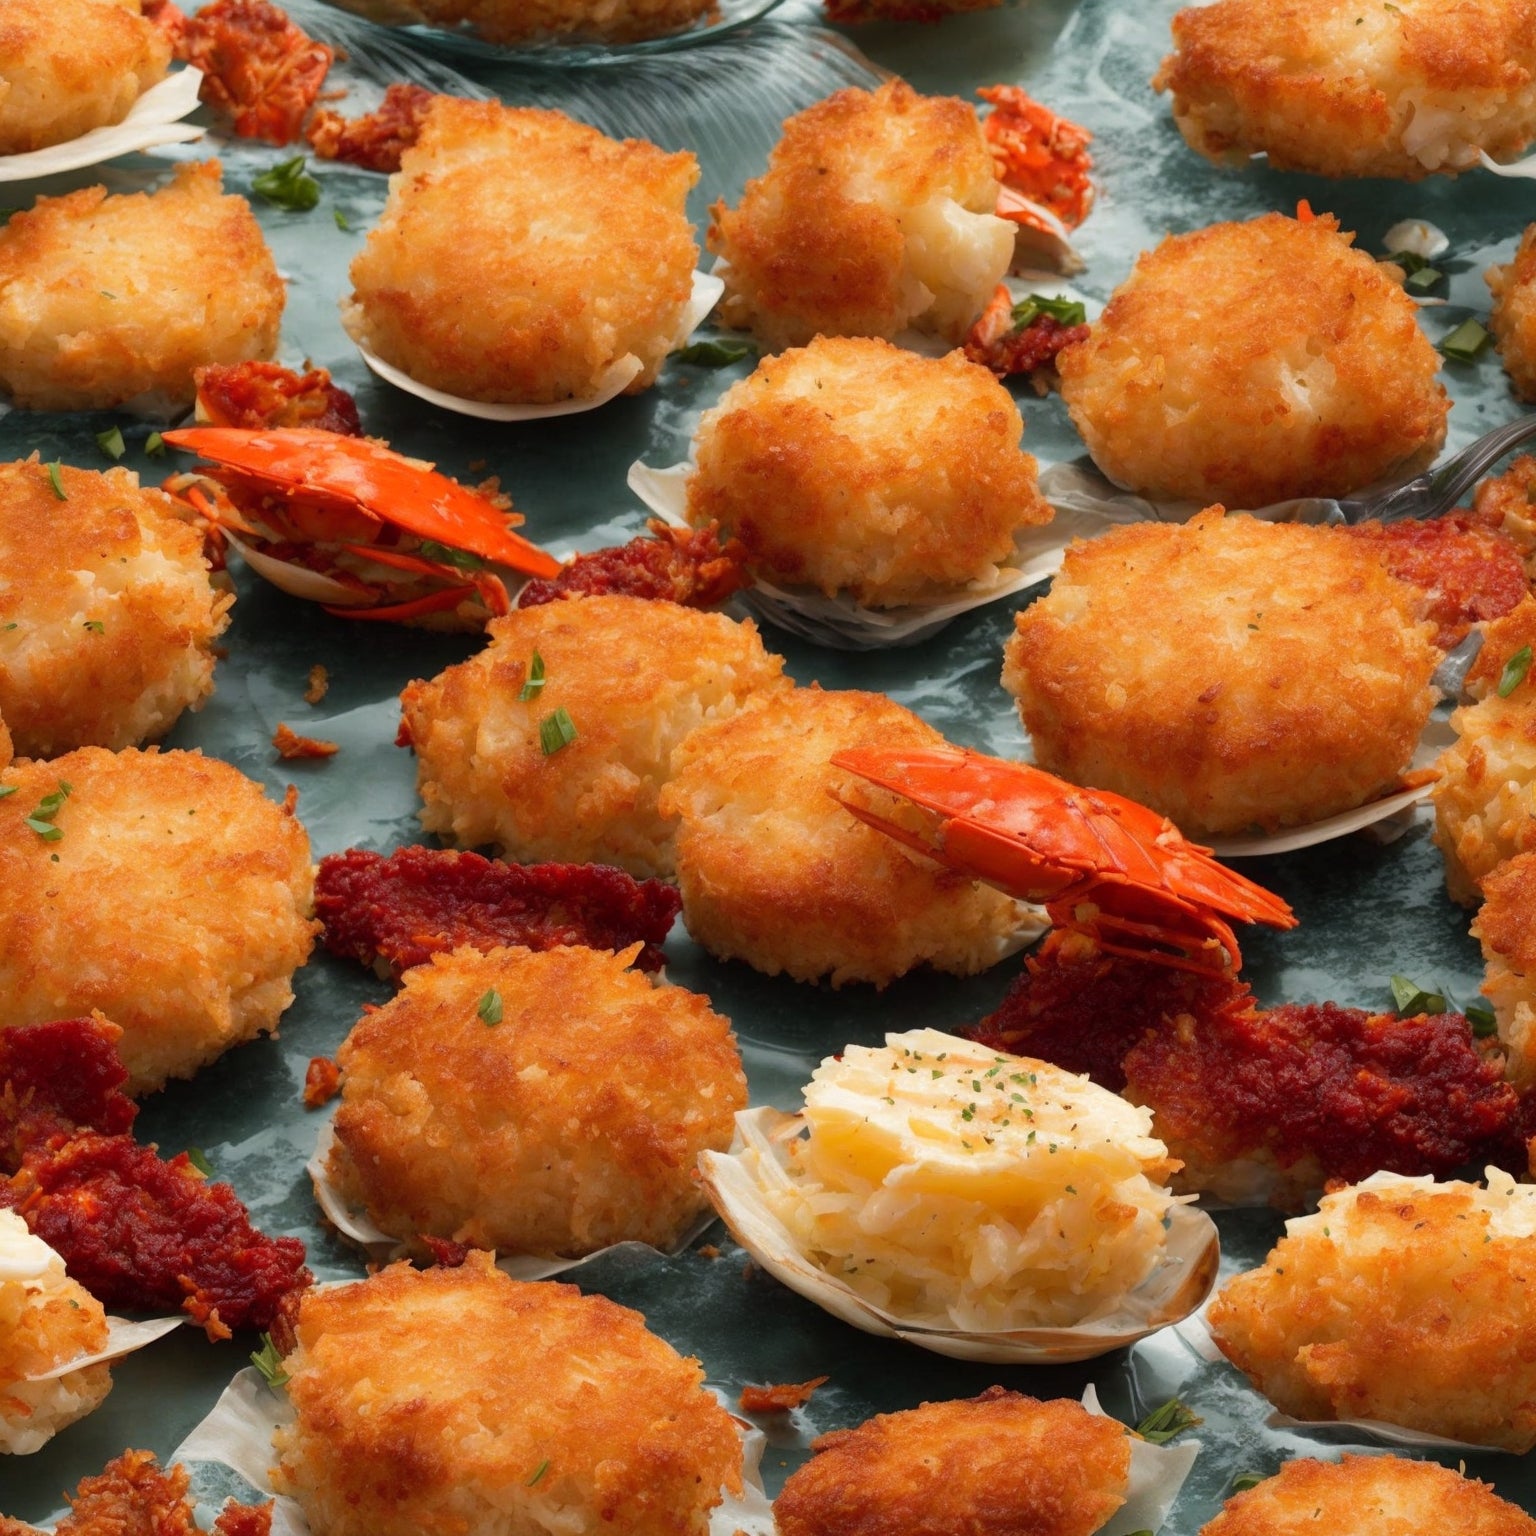 Cooking with Crab Meat: From Classic Crab Cakes to Creative Creations